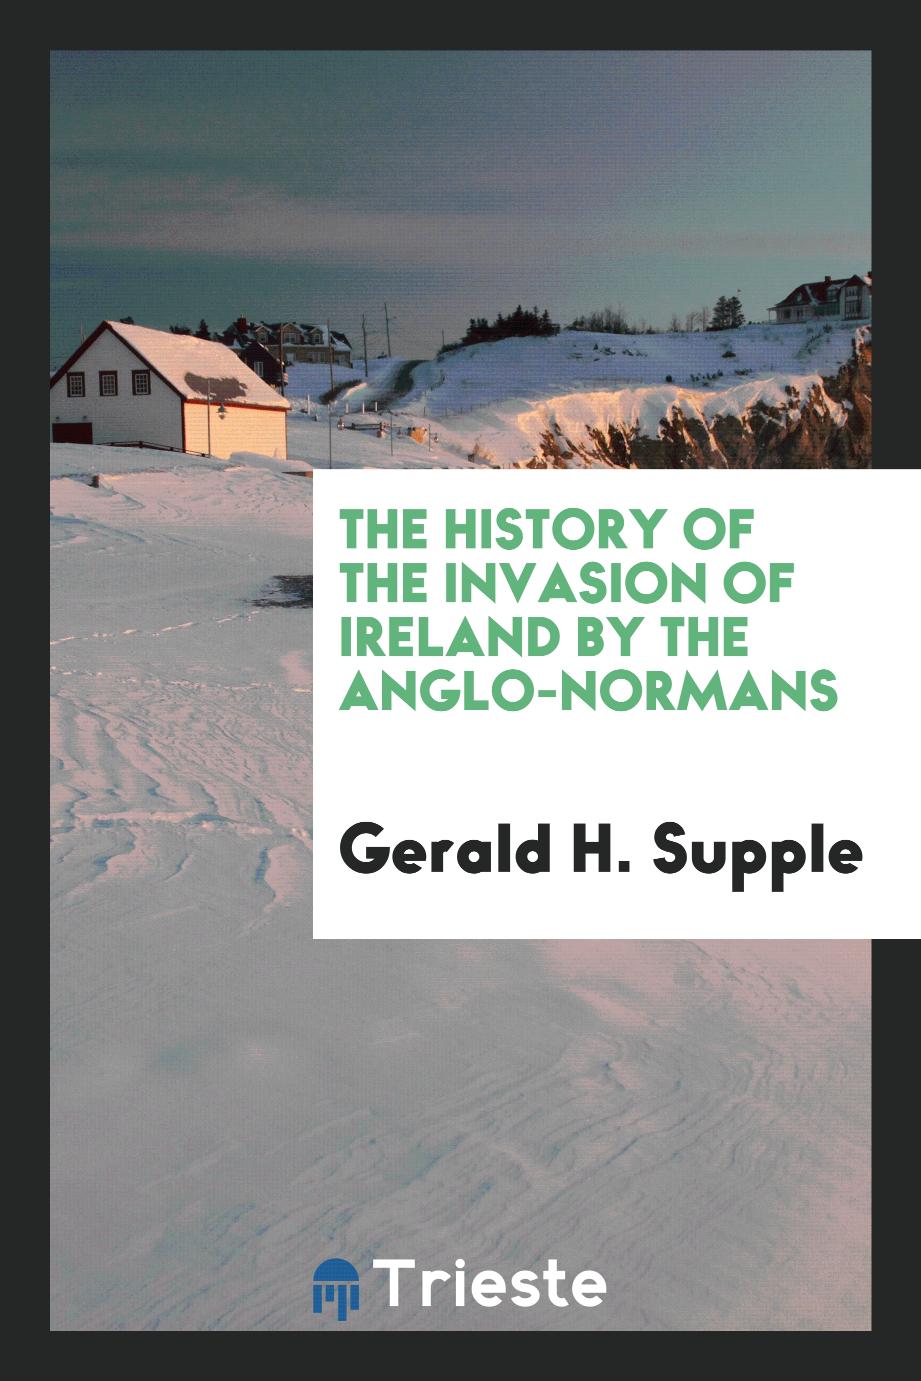 The History of the Invasion of Ireland by the Anglo-Normans